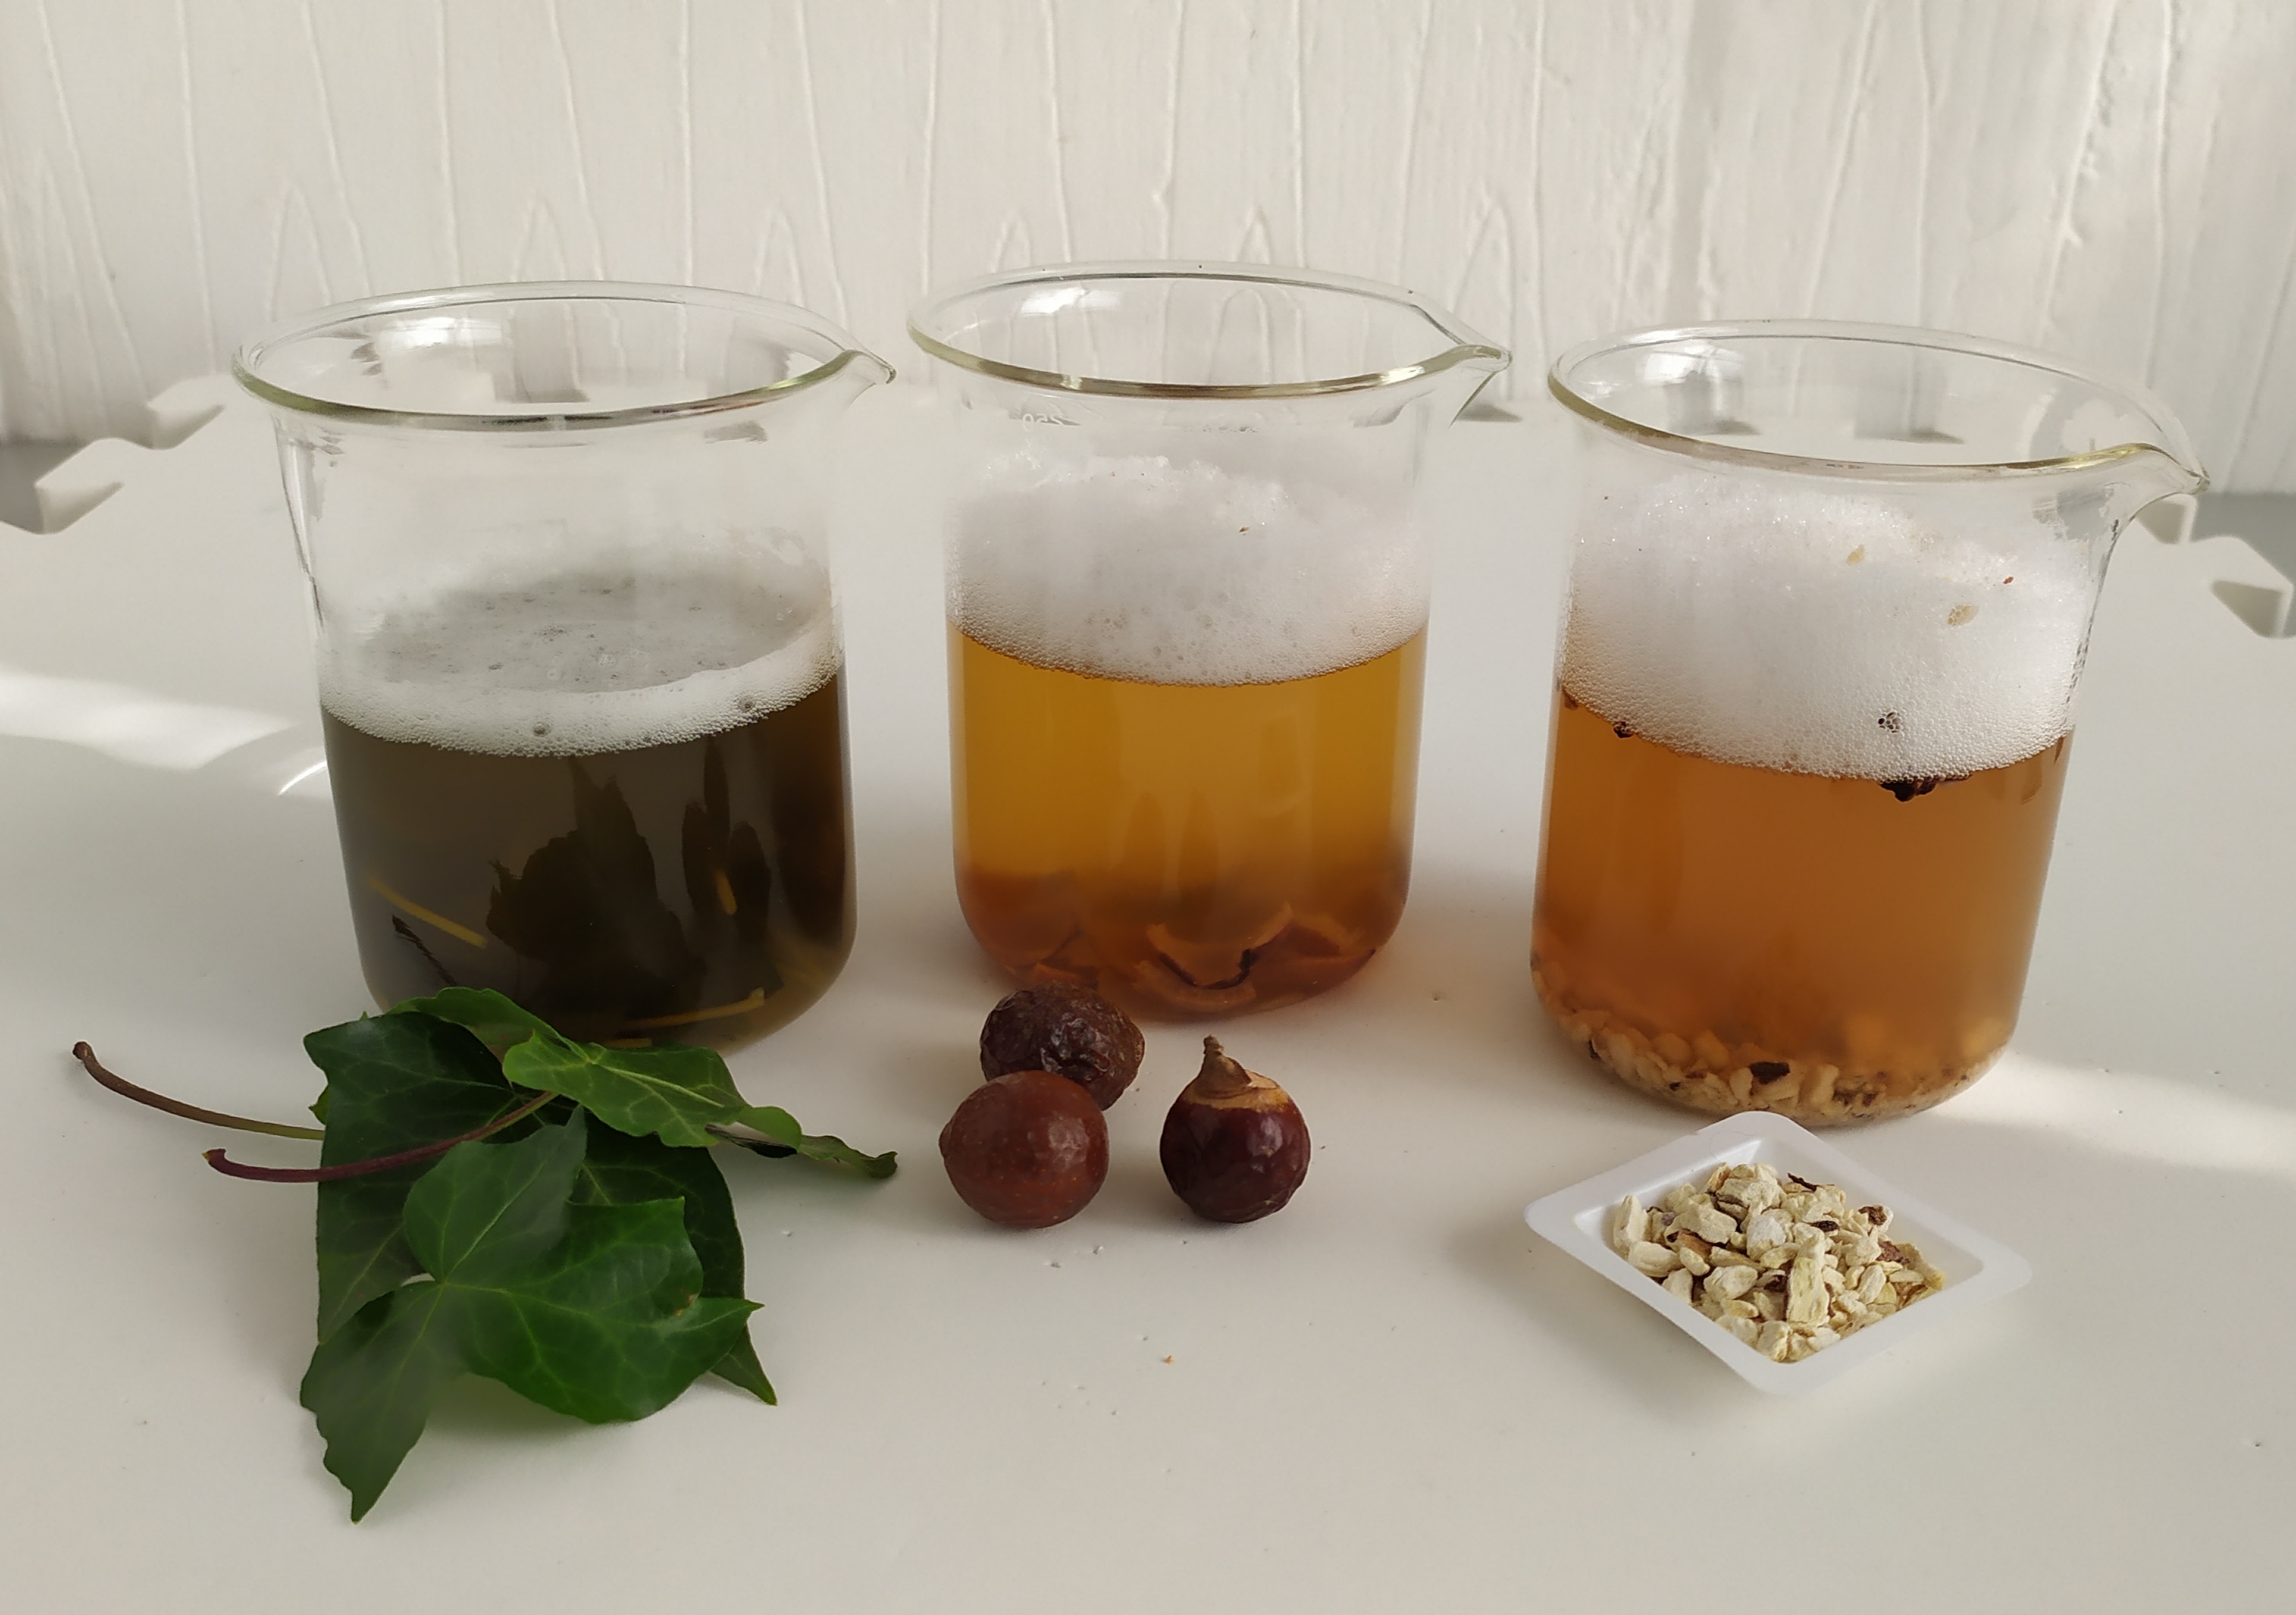 Saponin plant extractions. From left to right: Hedera Helix leaves, Sapindus Mukorossi fruit pericarp, and Saponaria Officinalis dried roots. Image courtesy of Caterina Celada-Prior.